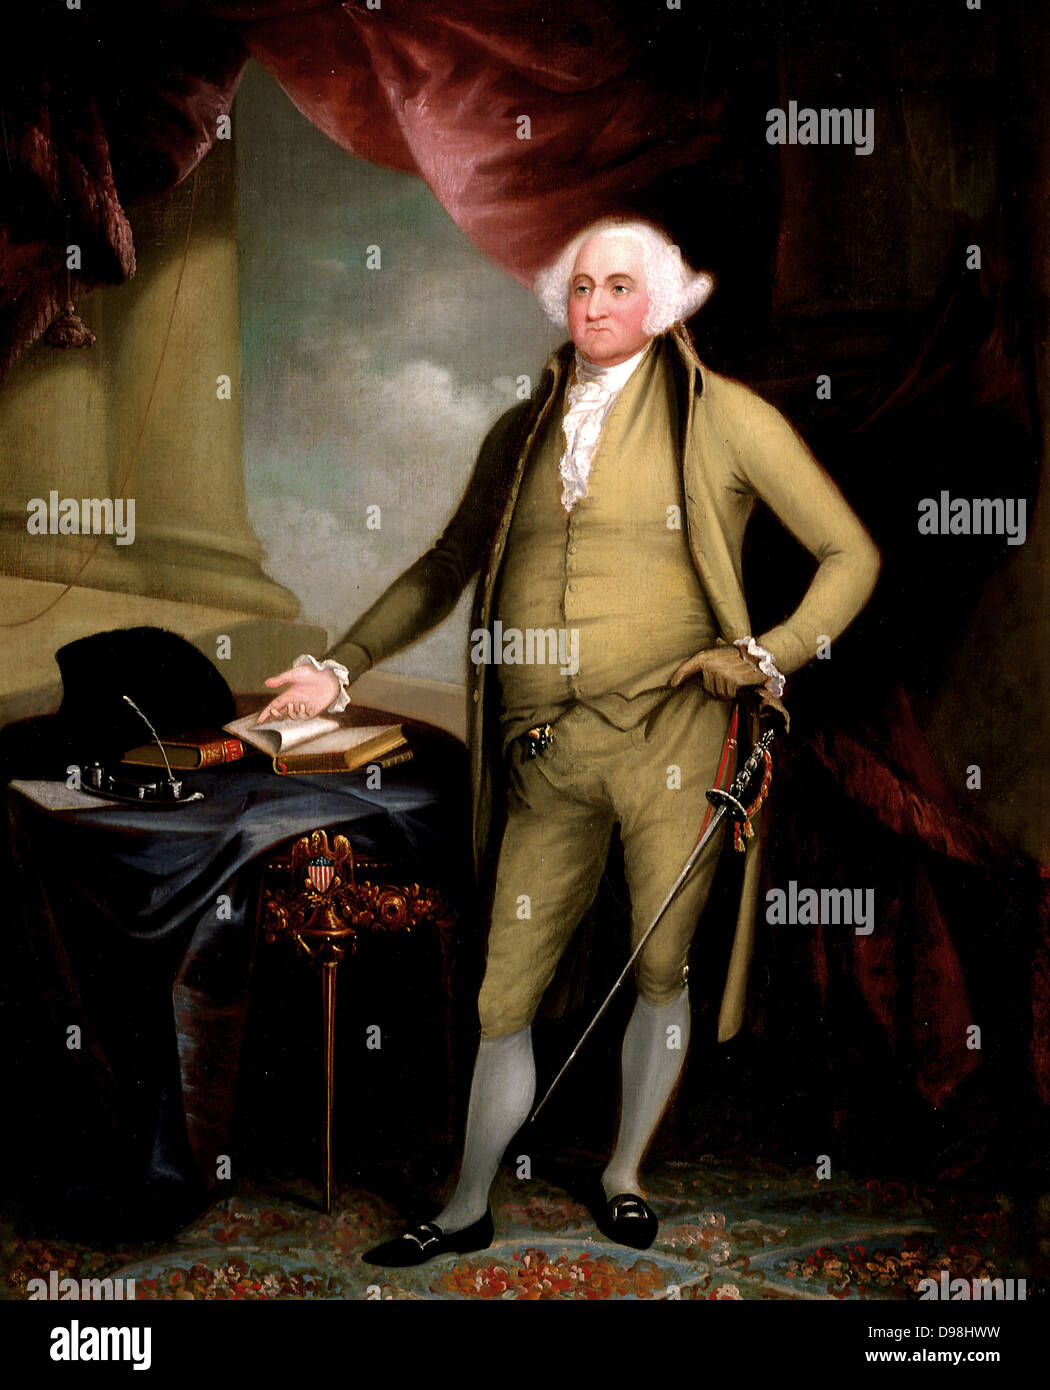 John Adams (October 30, 1735 – July 4, 1826) was an American statesman, diplomat and political theorist. A leading champion of independence in 1776, he was the second President of the United States (1797–1801). Portrait by William Winstanley, 1798. Stock Photo